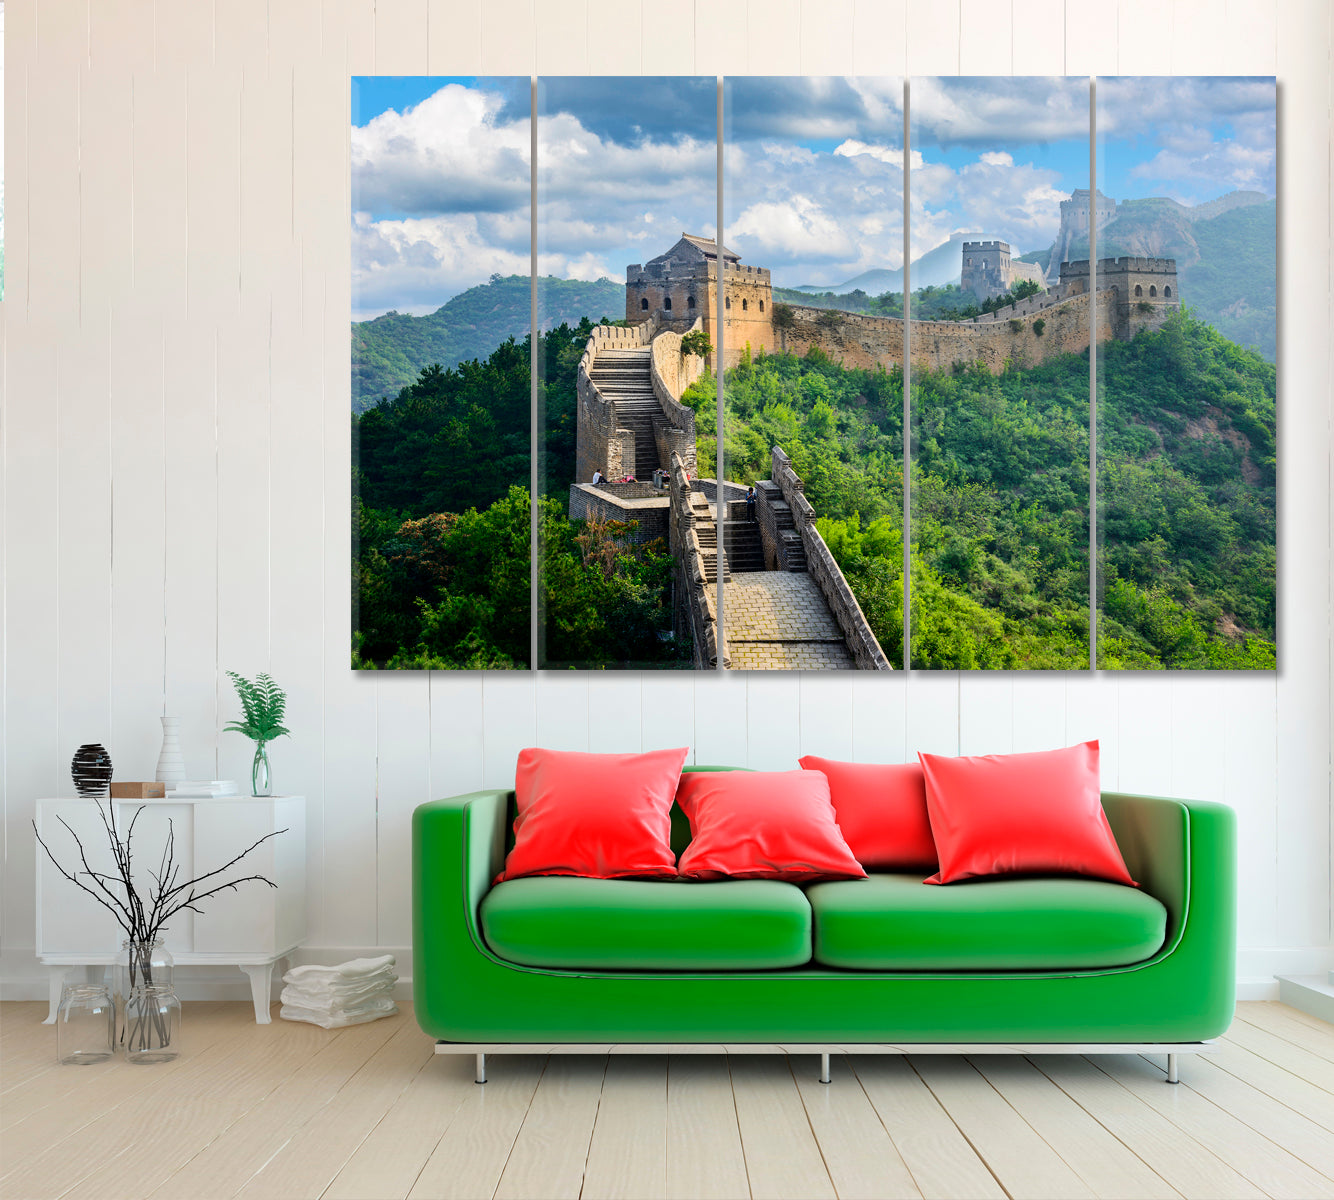 Great Wall of China Canvas Print ArtLexy 5 Panels 36"x24" inches 